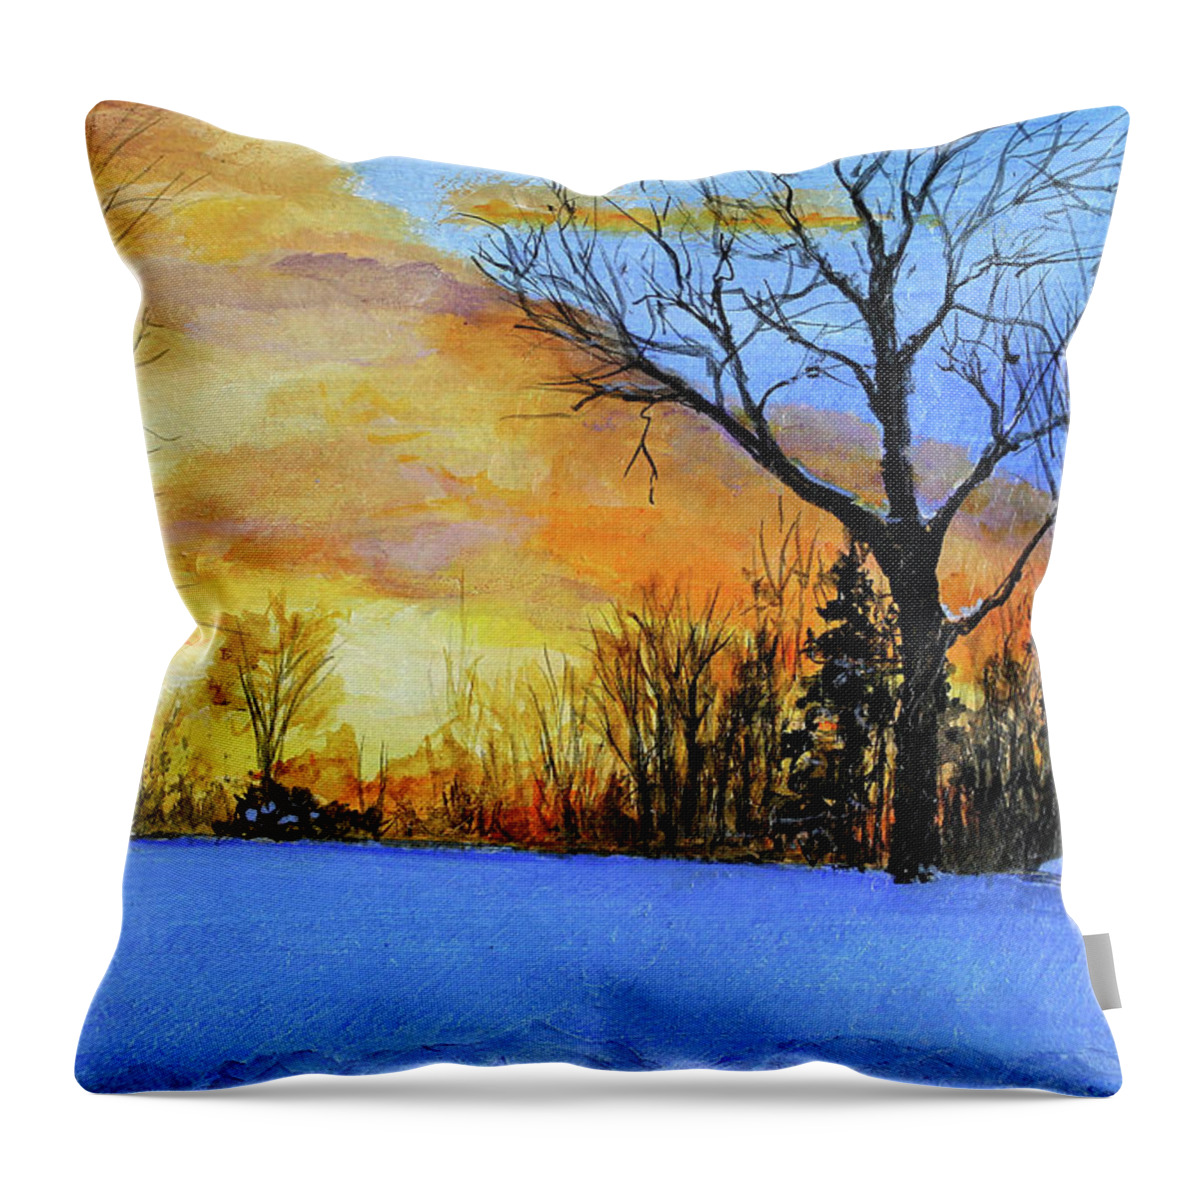 Sunset Throw Pillow featuring the painting December Sunset by C Keith Jones